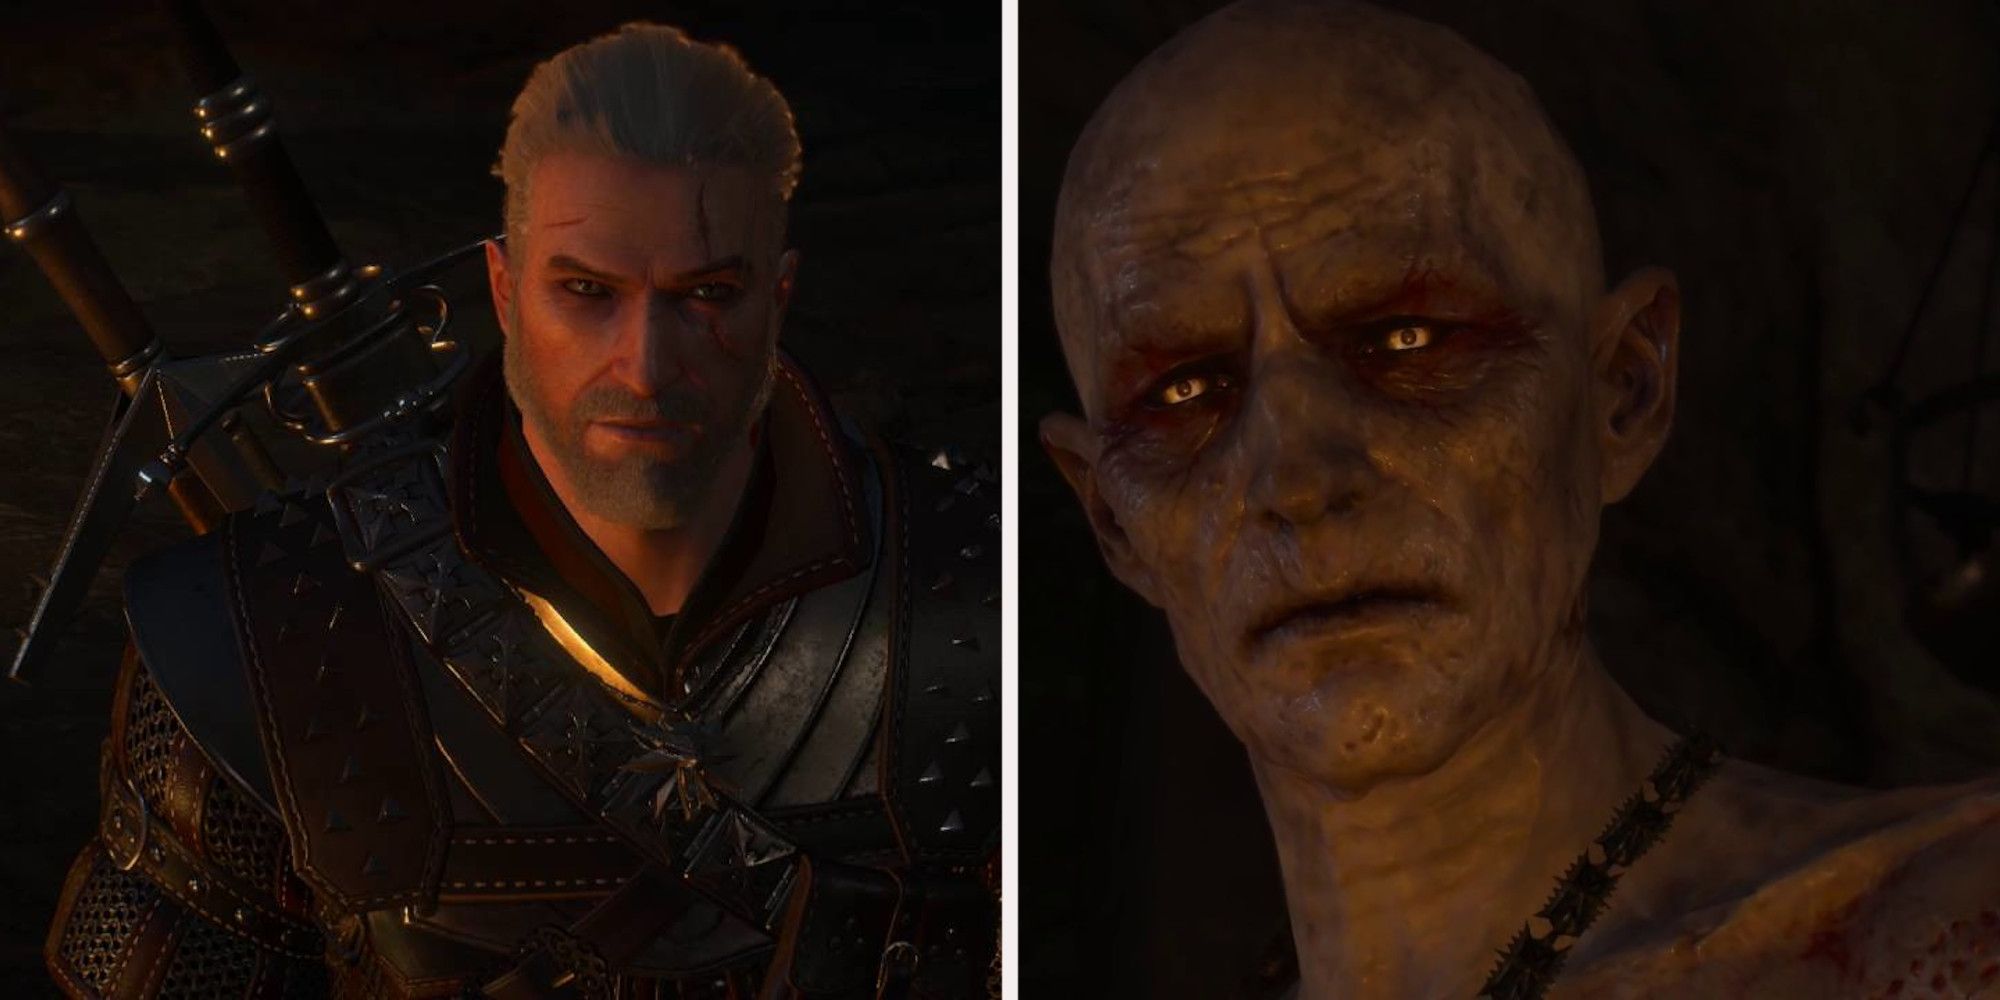 the-witcher-3-blood-and-wine-to-feature-quest-full-of-songs-and-poetry-czech-translator-knows